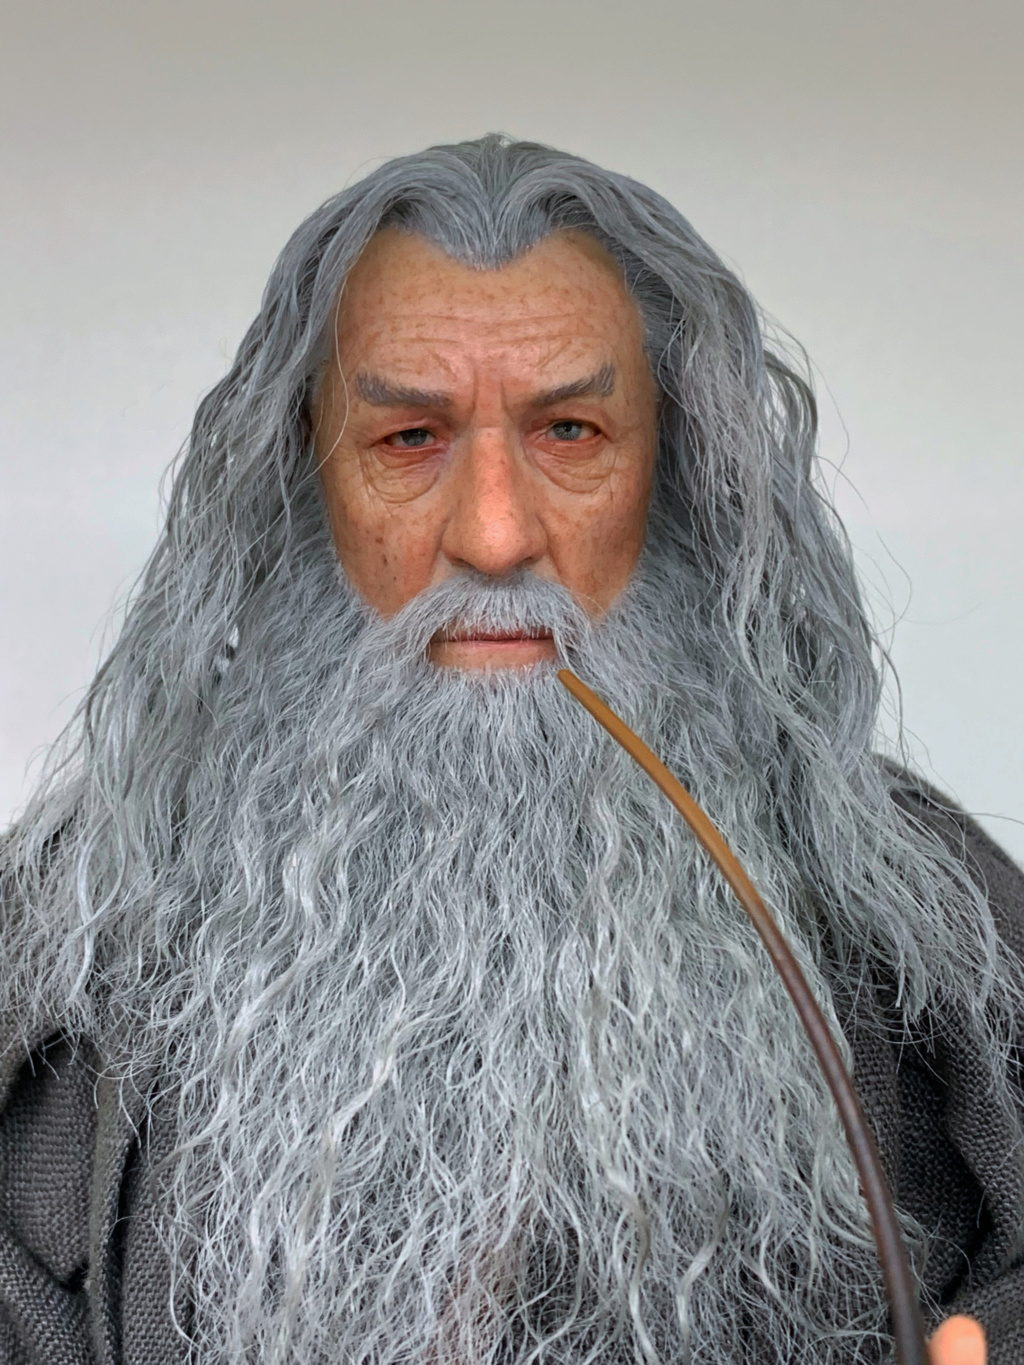 LordoftheRings - NEW PRODUCT: Queen Studios & INART: 1/6 The Lord of the Rings Gandalf (Grey Robe) Action Figure - Page 4 47698910